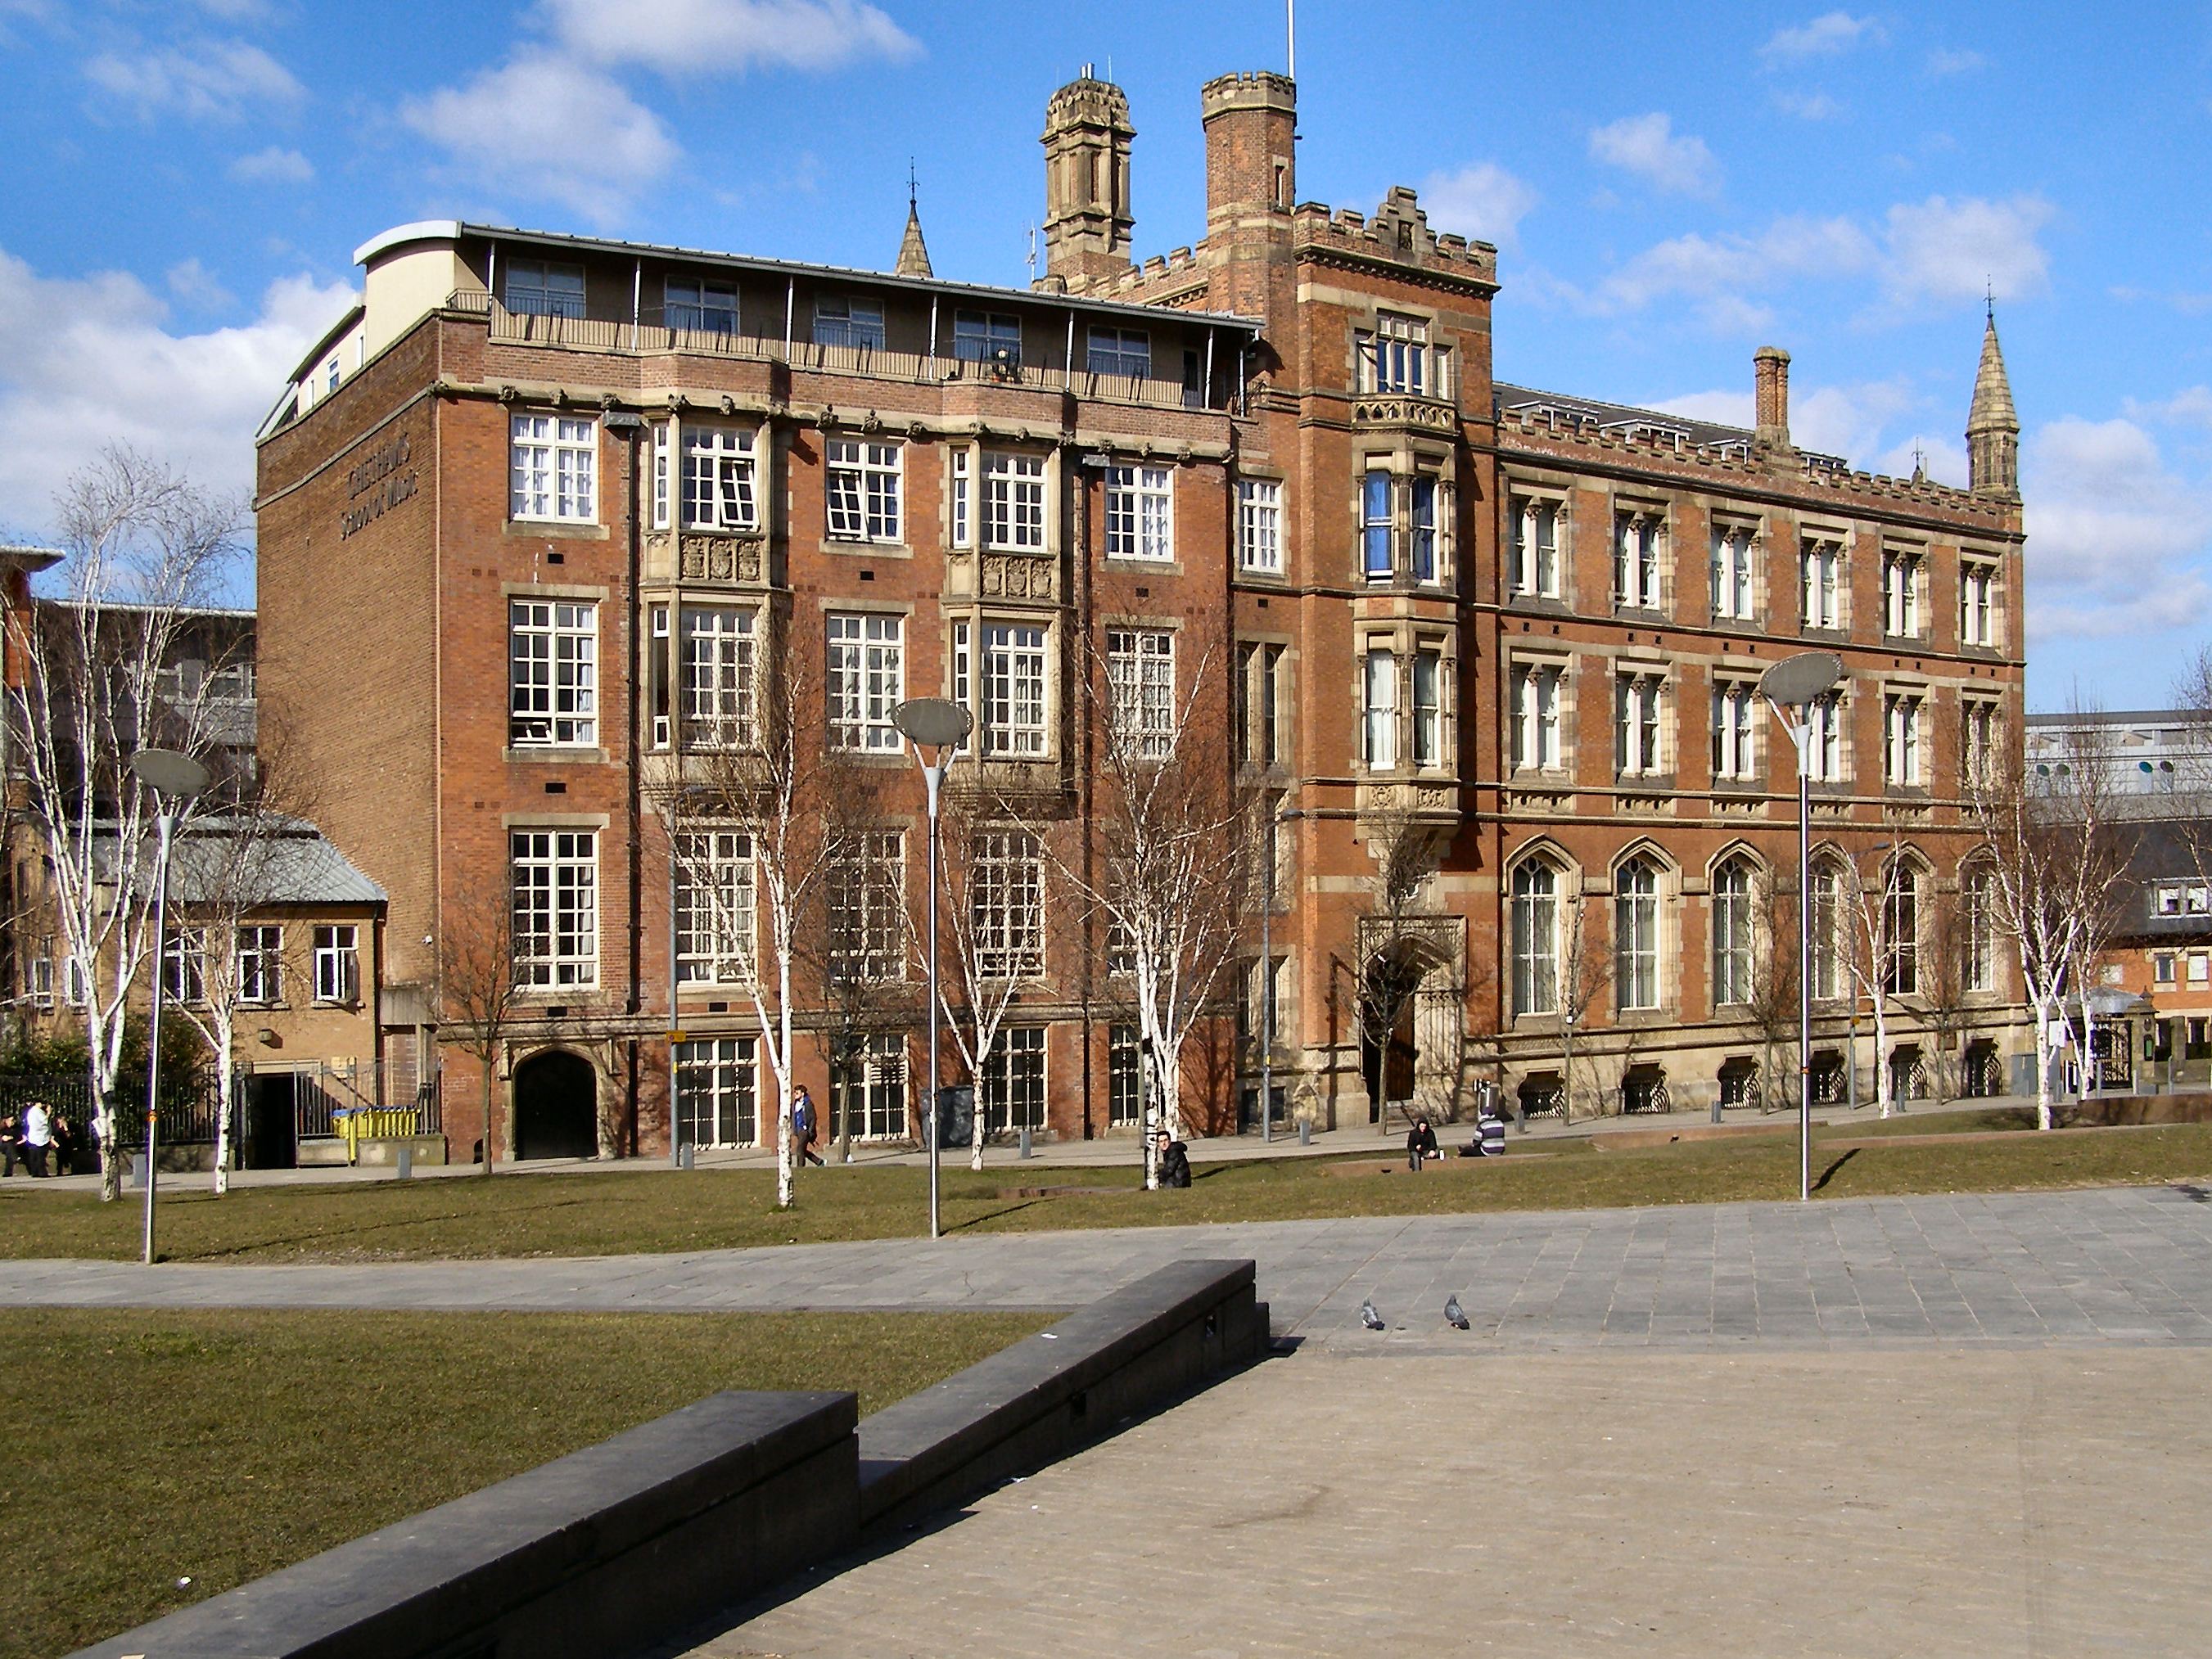 Chetham's School of Music in Manchester, England.